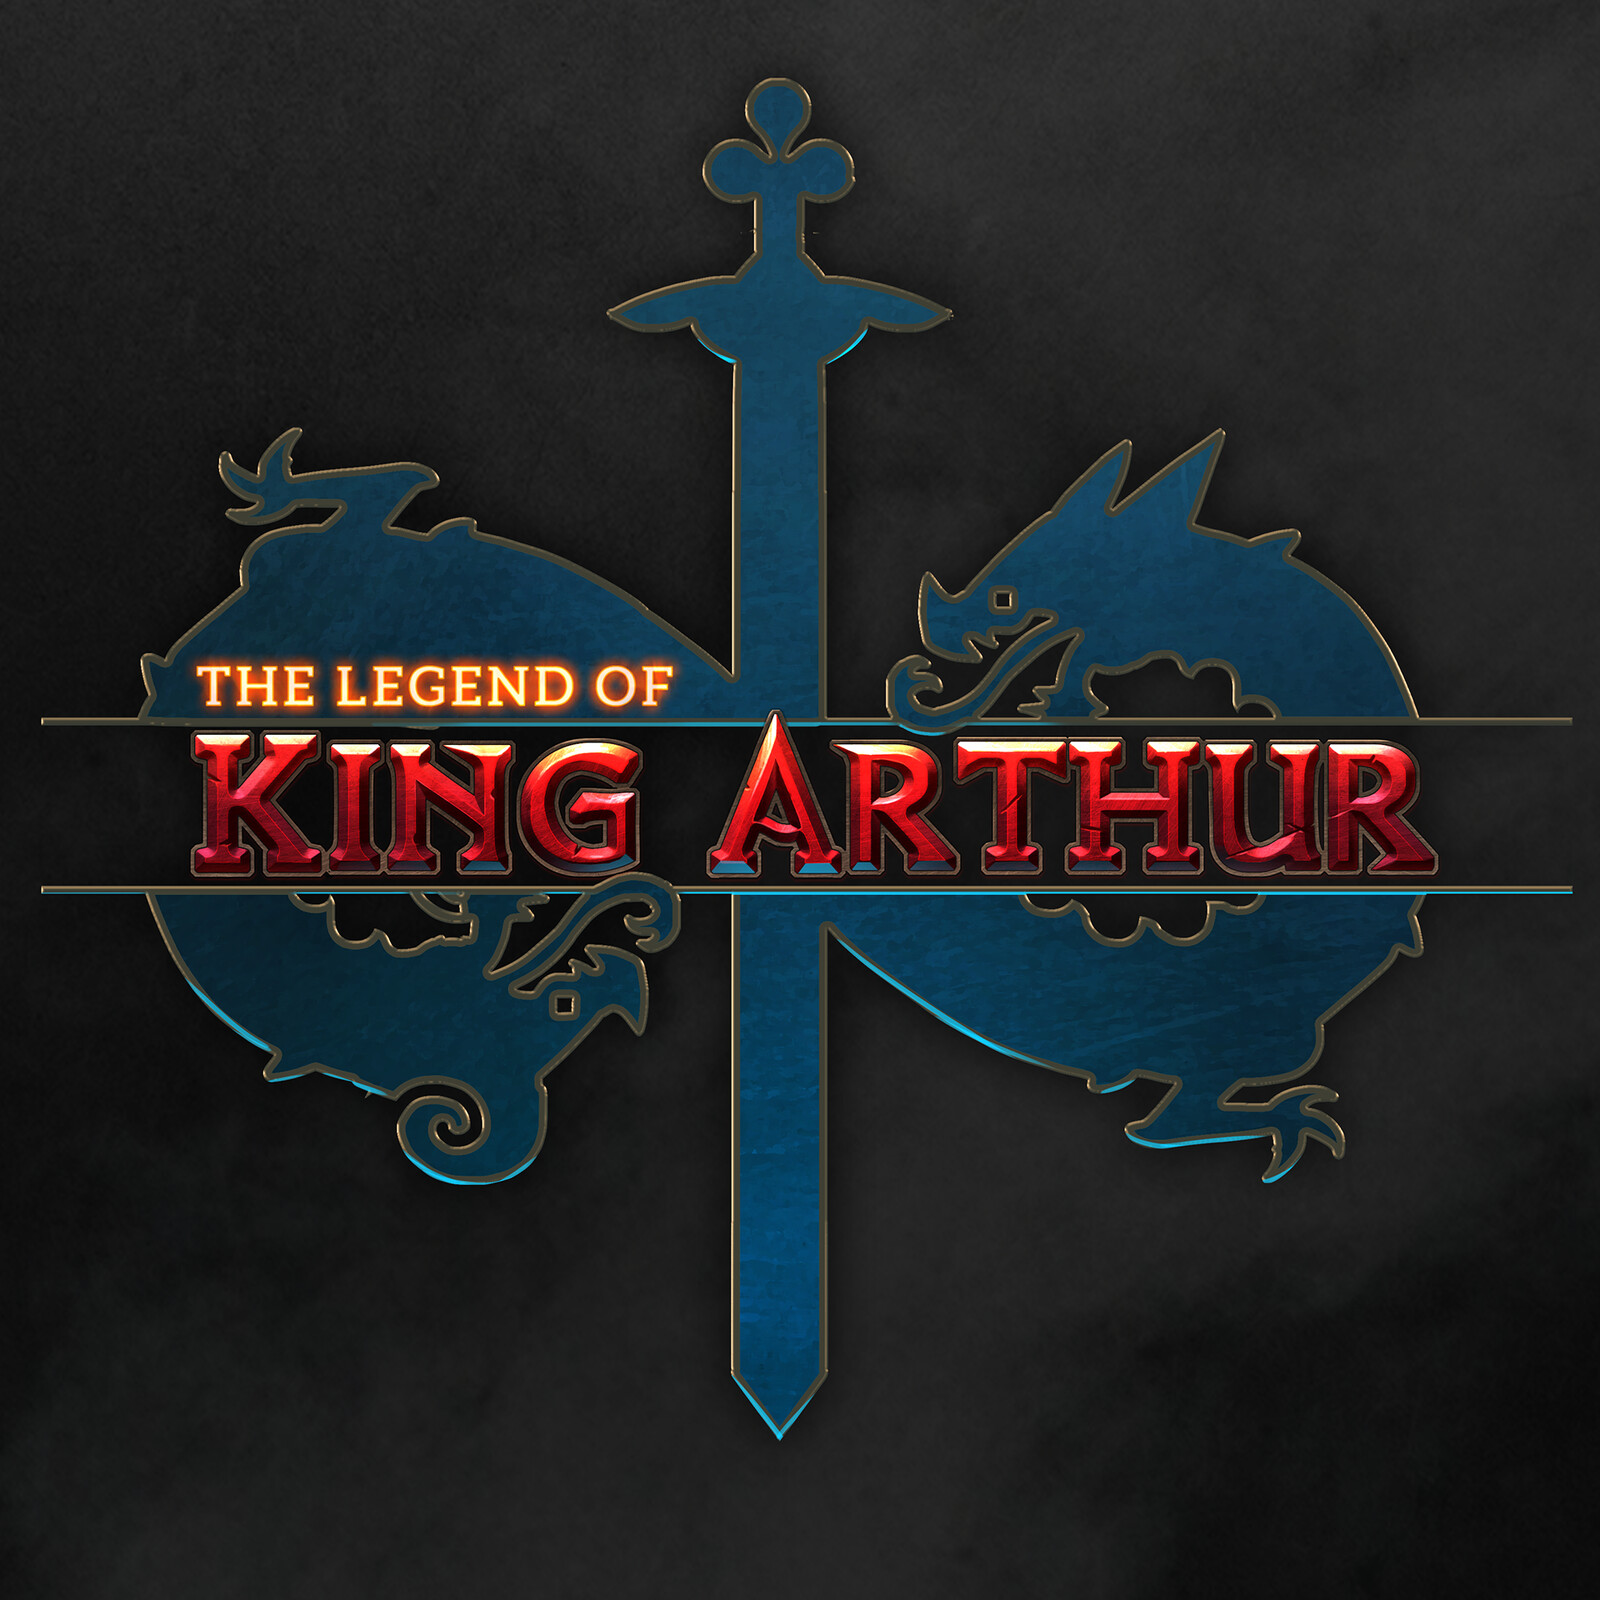 The title art using the sigil I designed for King Arthur inspired by fantasy game titles.